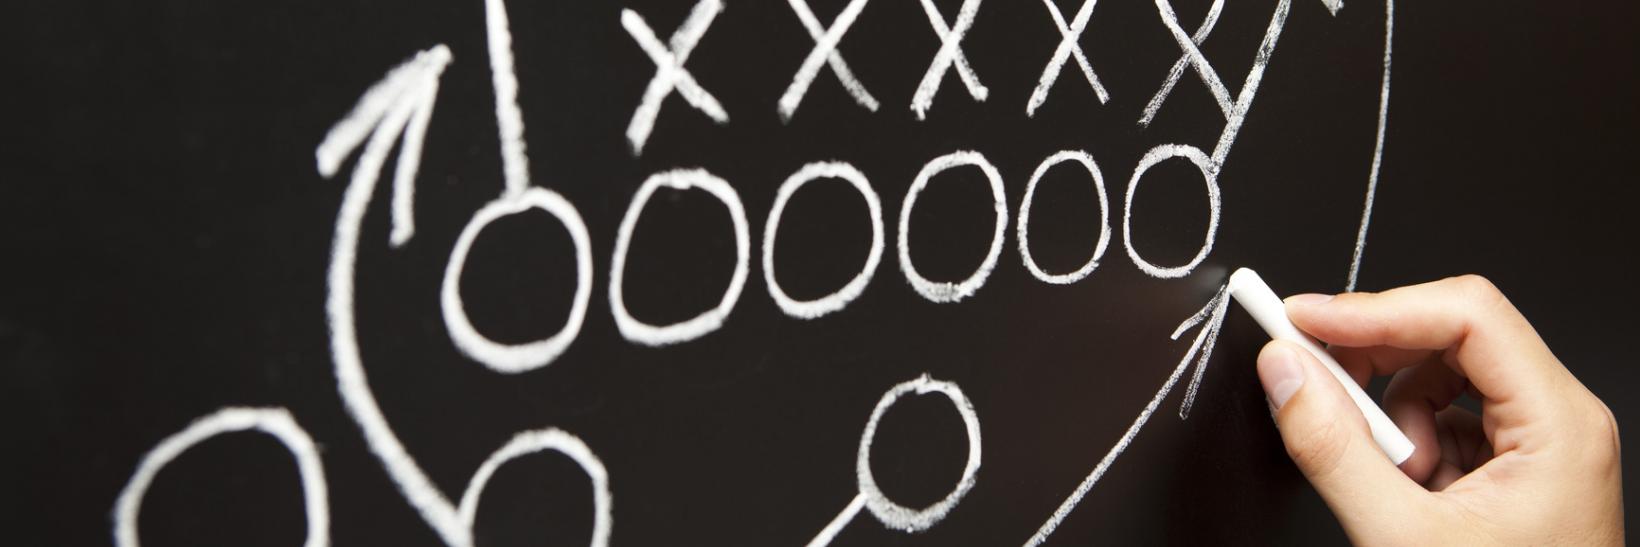 Sports strategy drawn in X's and O's on a chalkboard. 